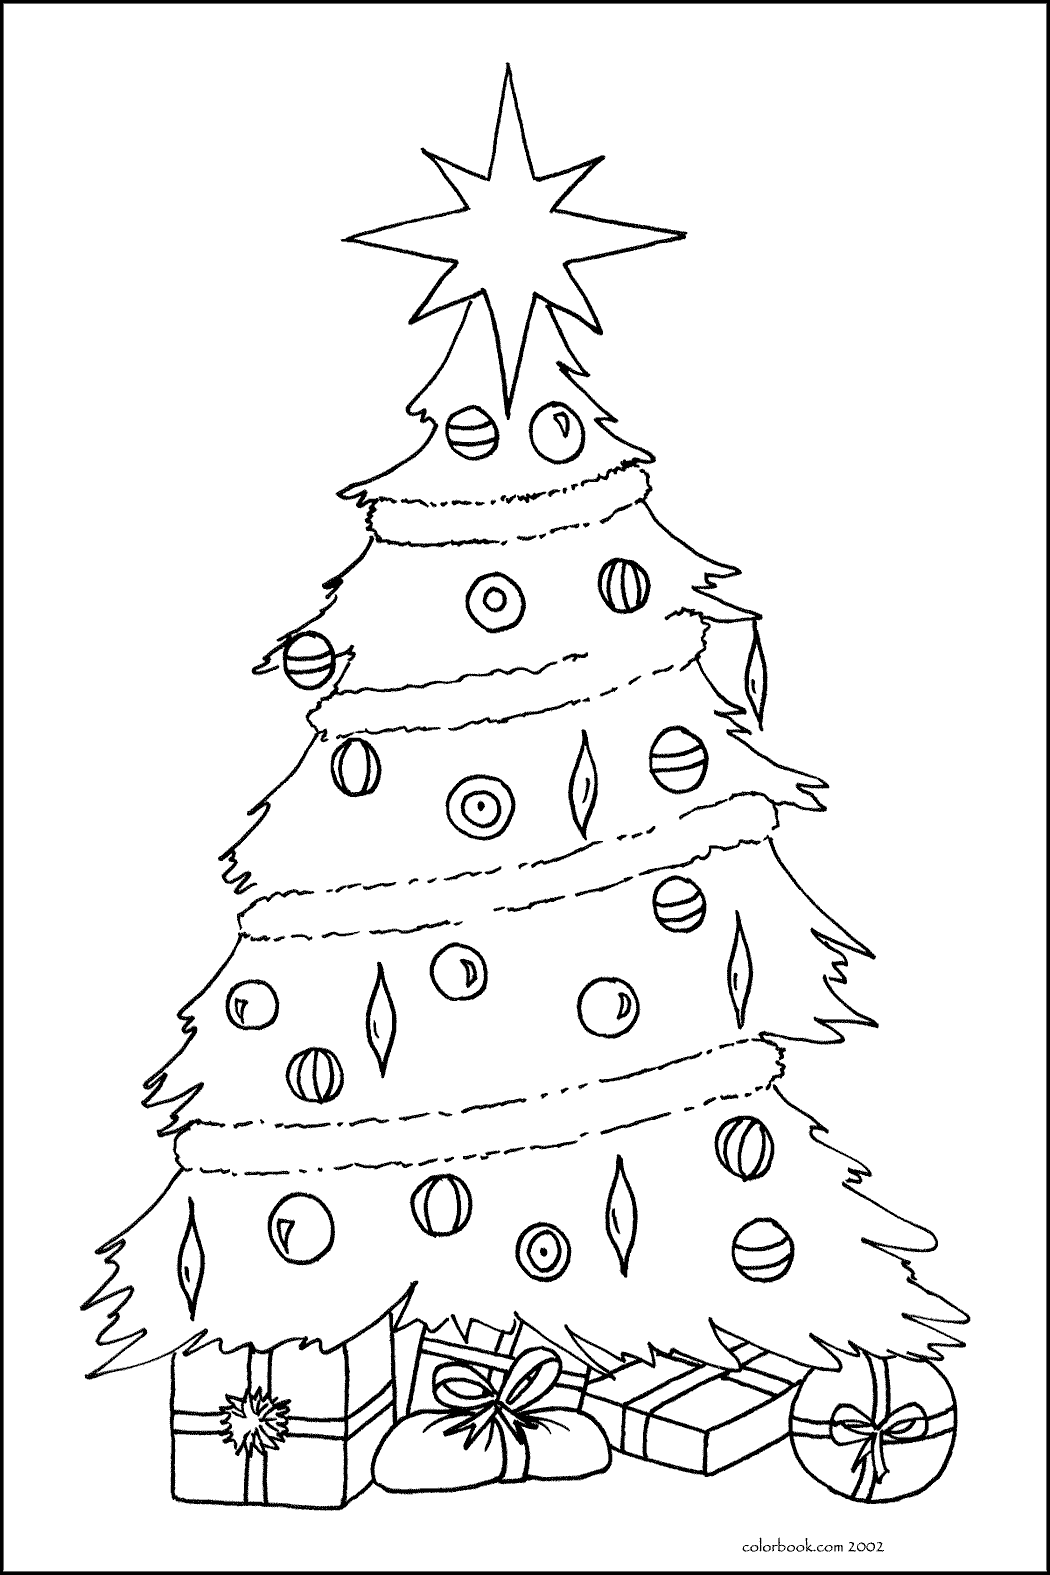 christmas-tree-coloring-pages-free-printable-pictures-coloring-pages-for-kids